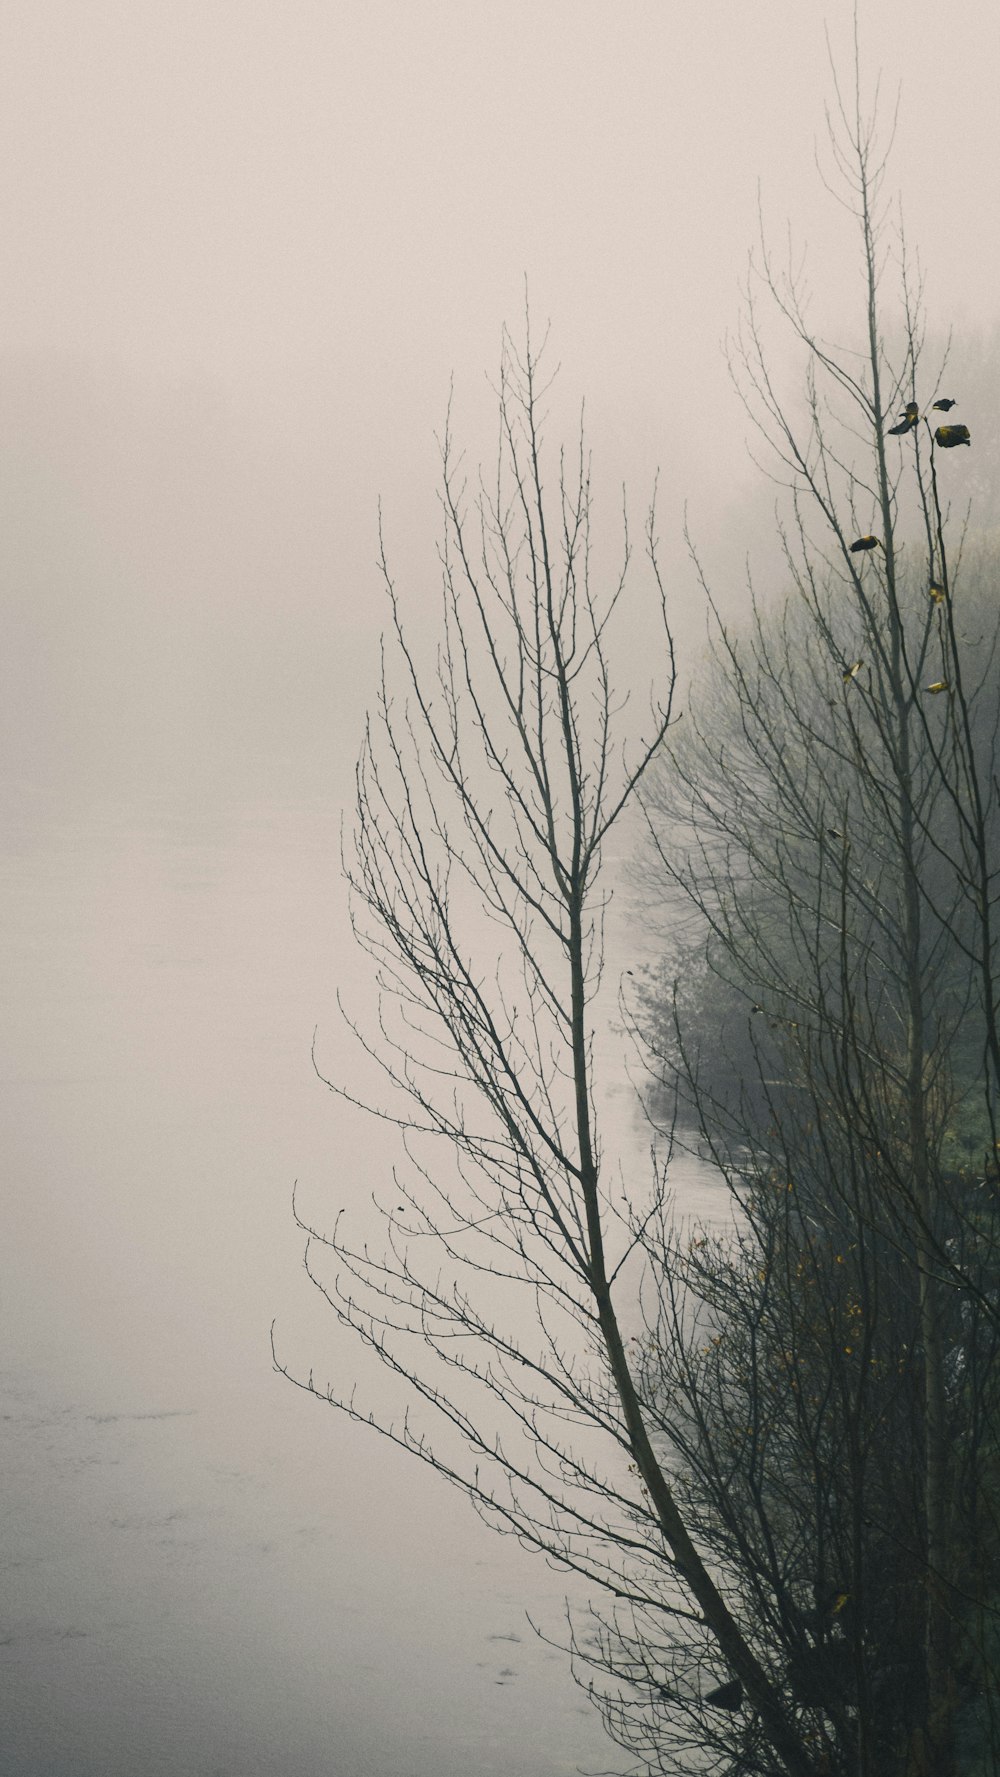 a foggy view of a body of water with trees in the foreground